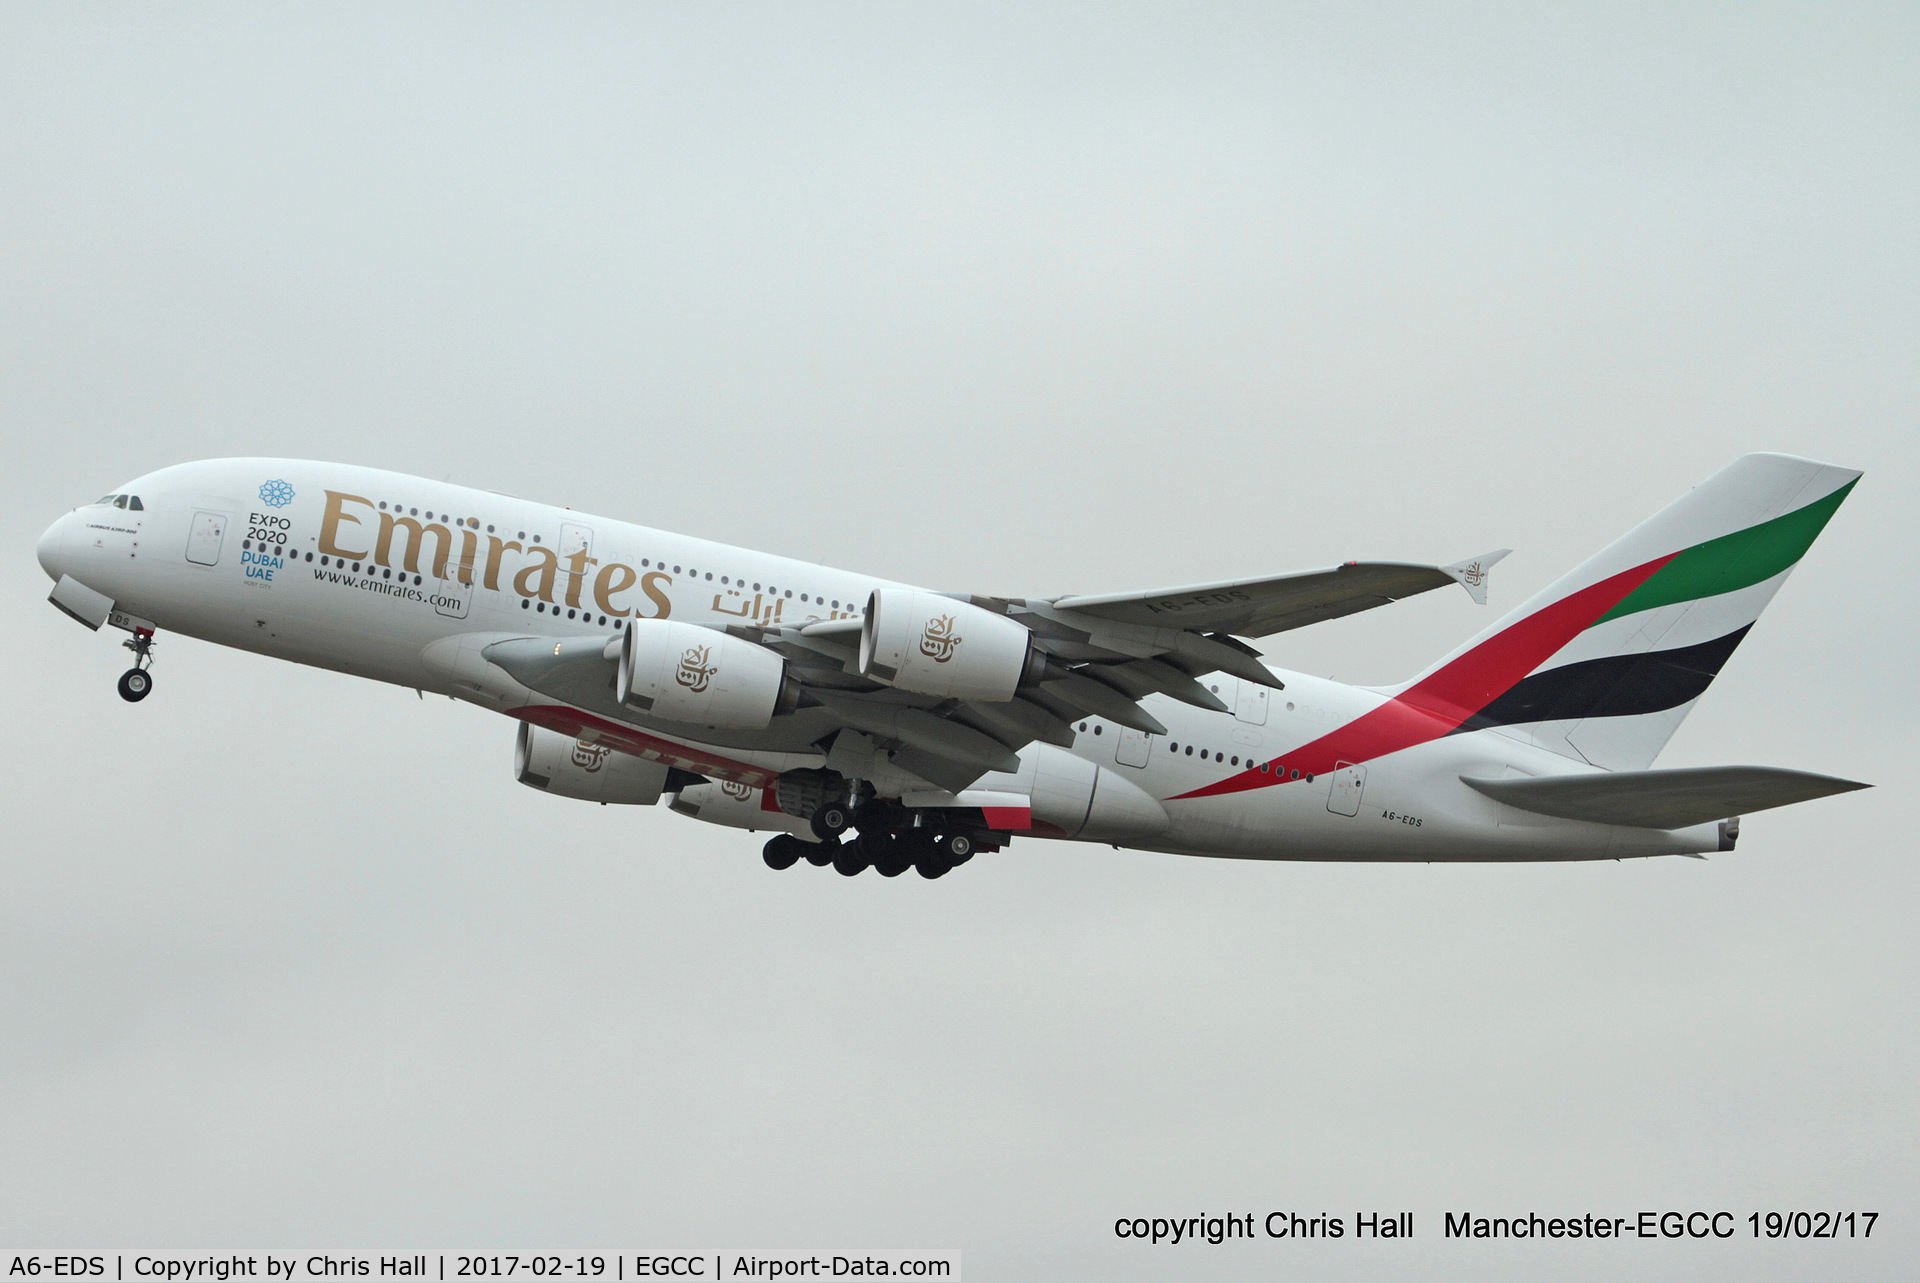 A6-EDS, 2011 Airbus A380-861 C/N 086, Emirates